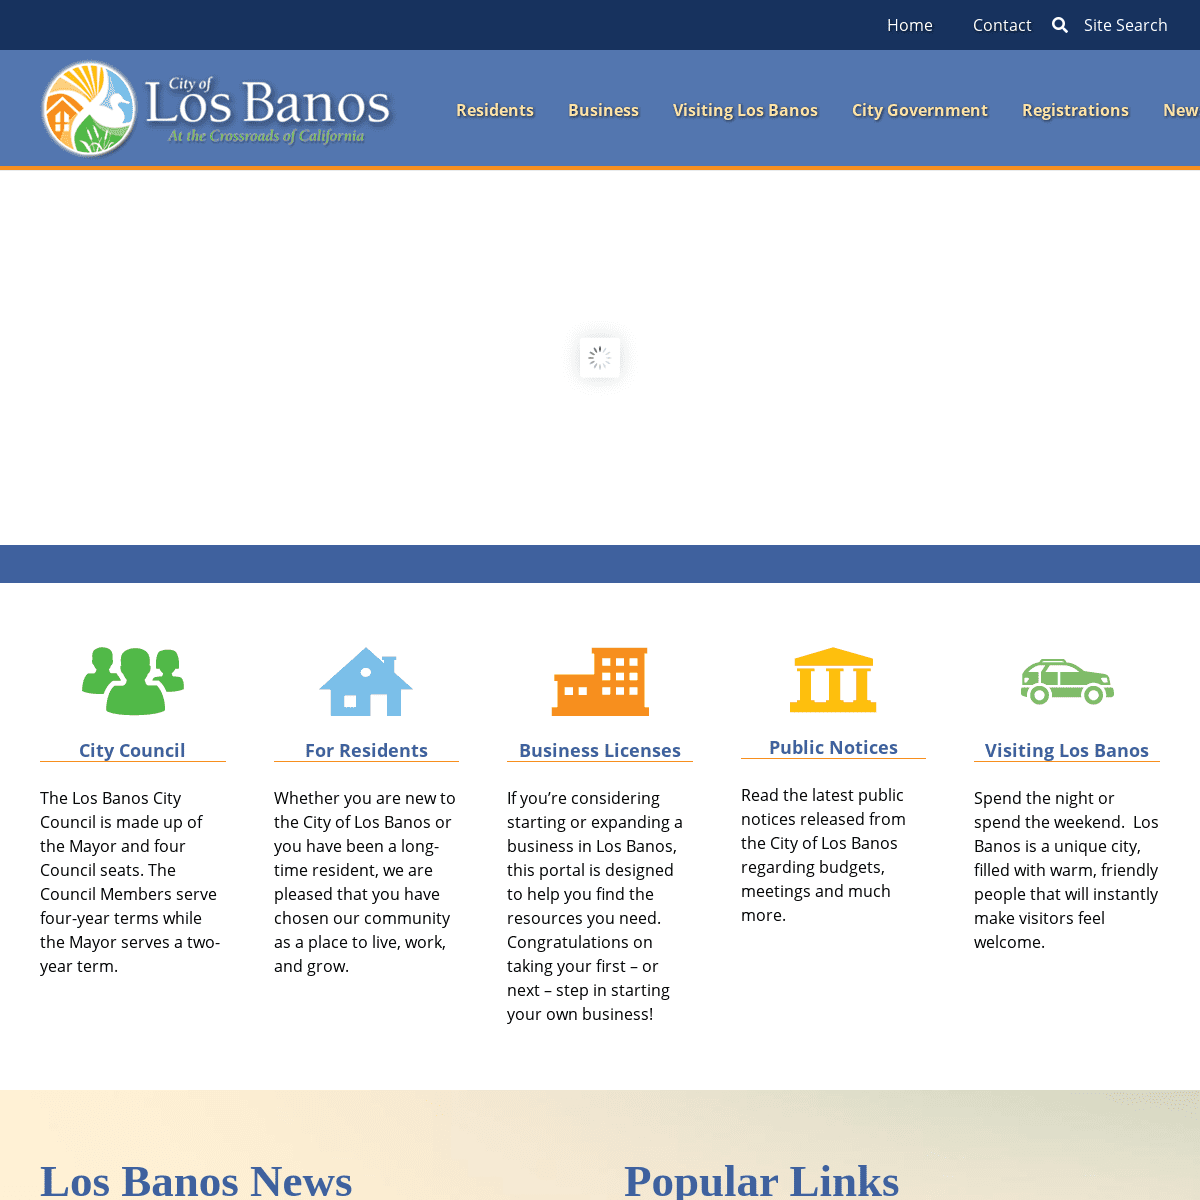 A complete backup of https://losbanos.org